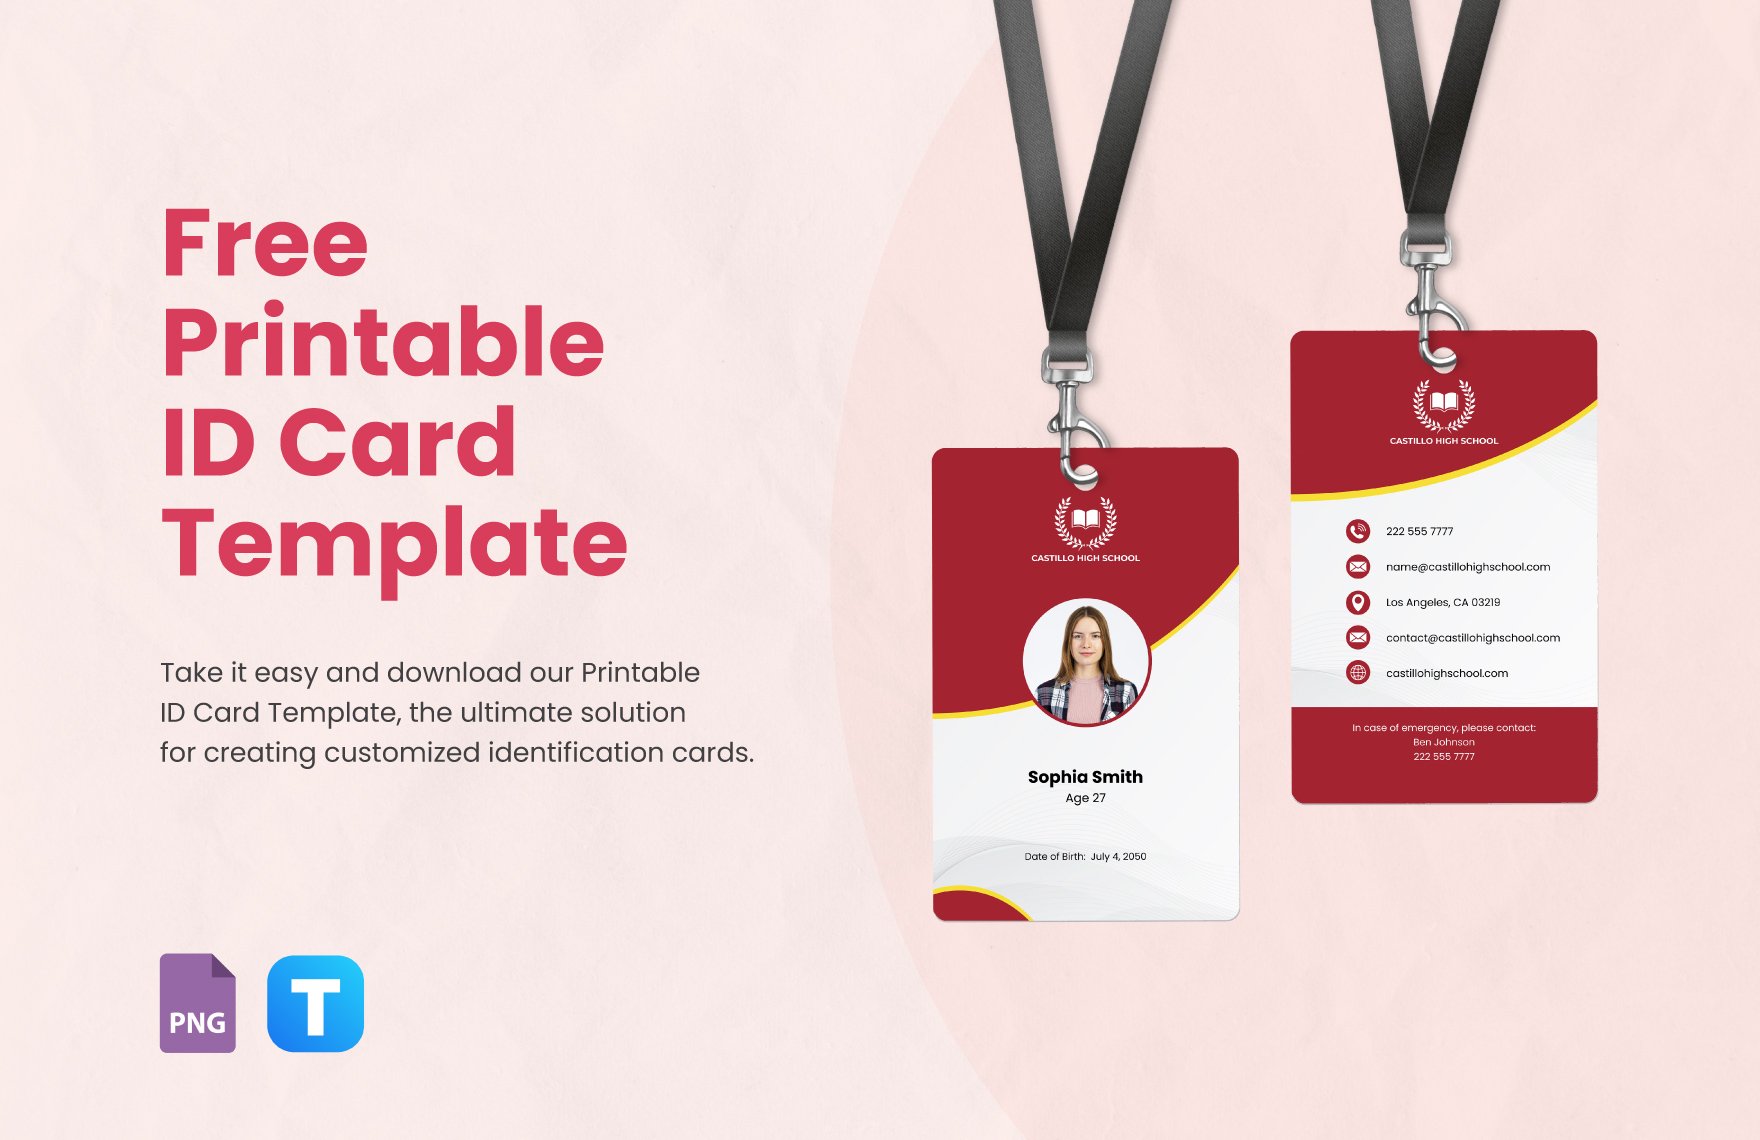 free-printable-id-card-template-download-in-png-template